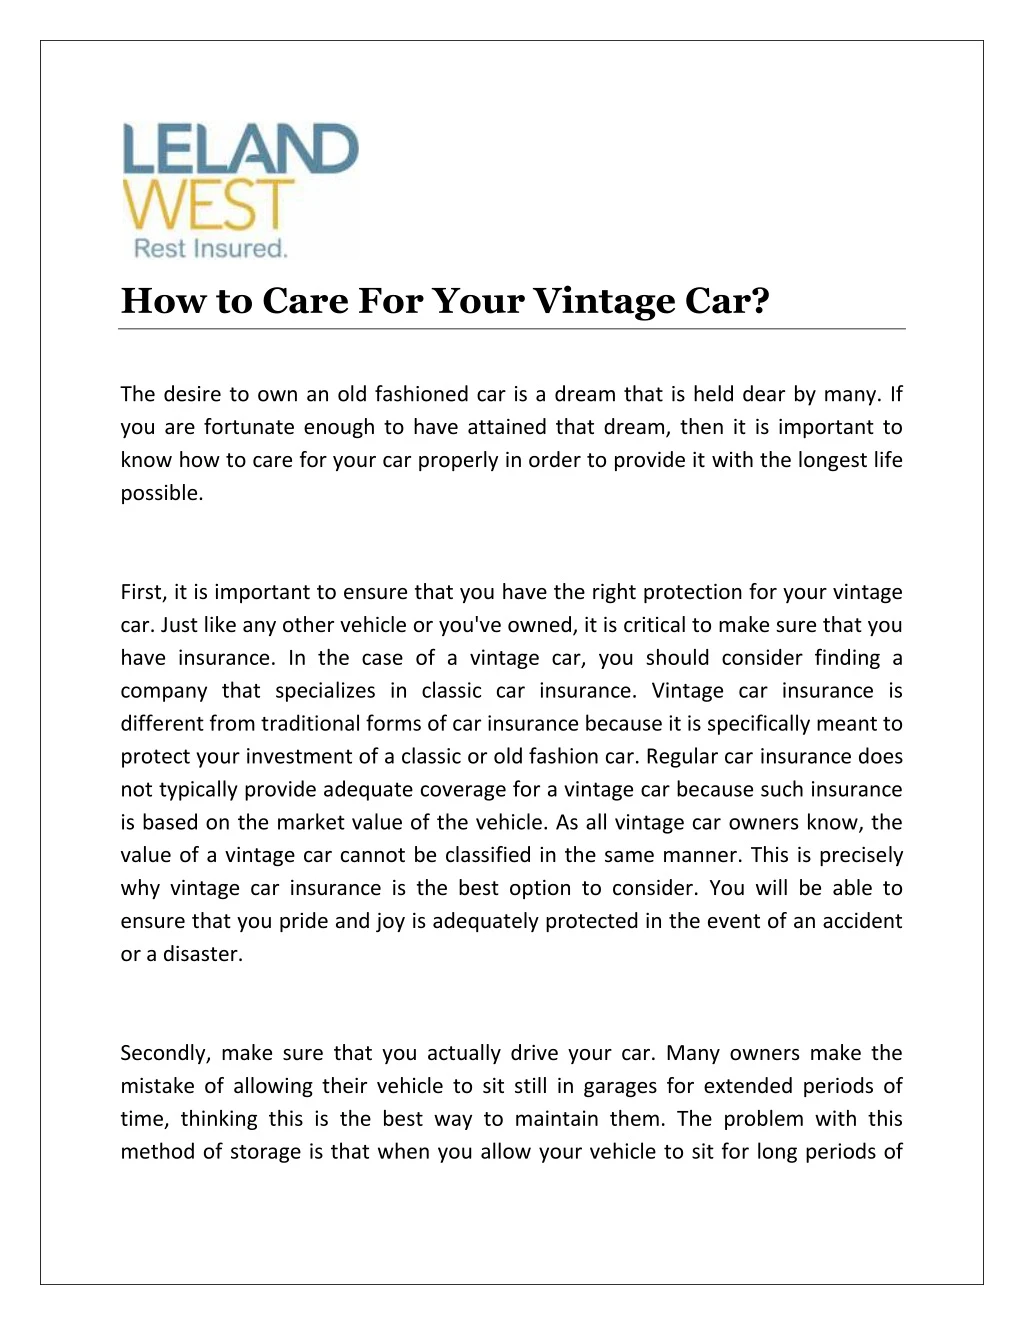 how to care for your vintage car